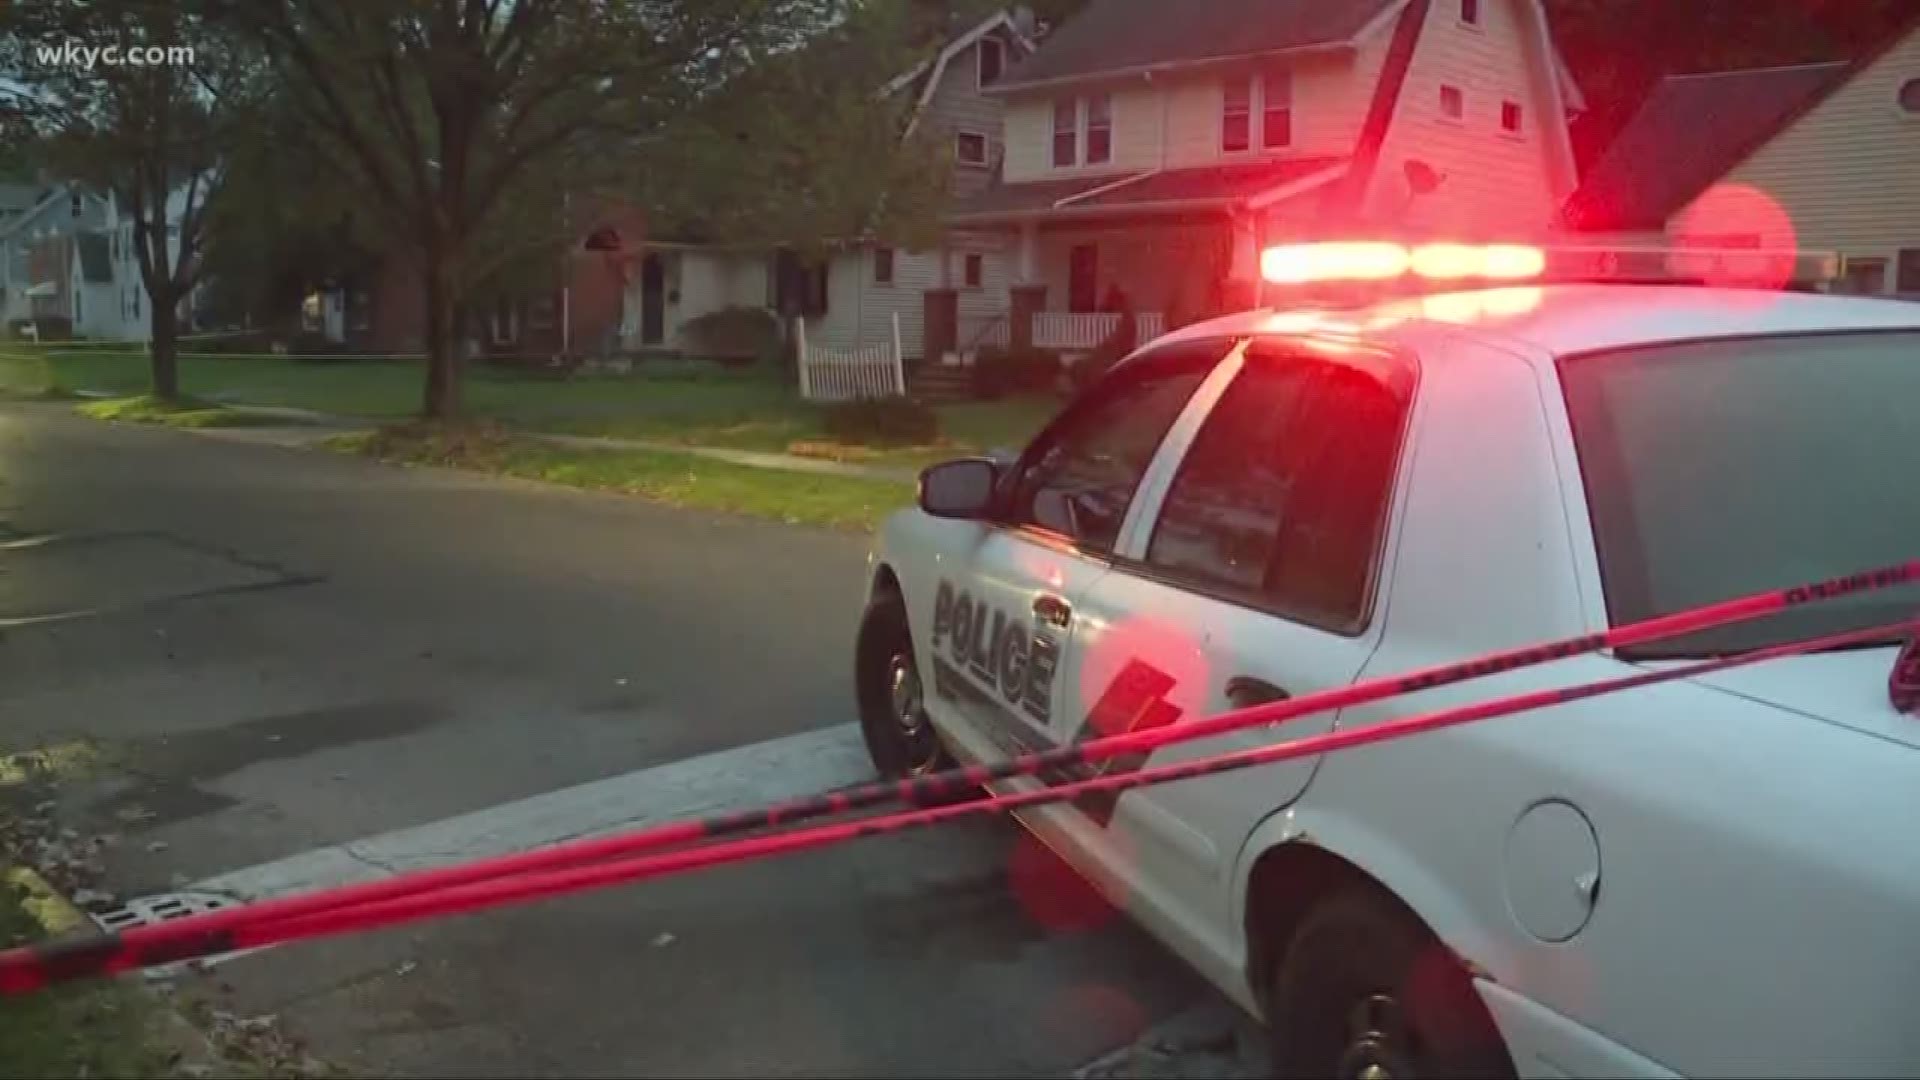 Bedford home searched in connection with bodies found burned inside car in East Cleveland